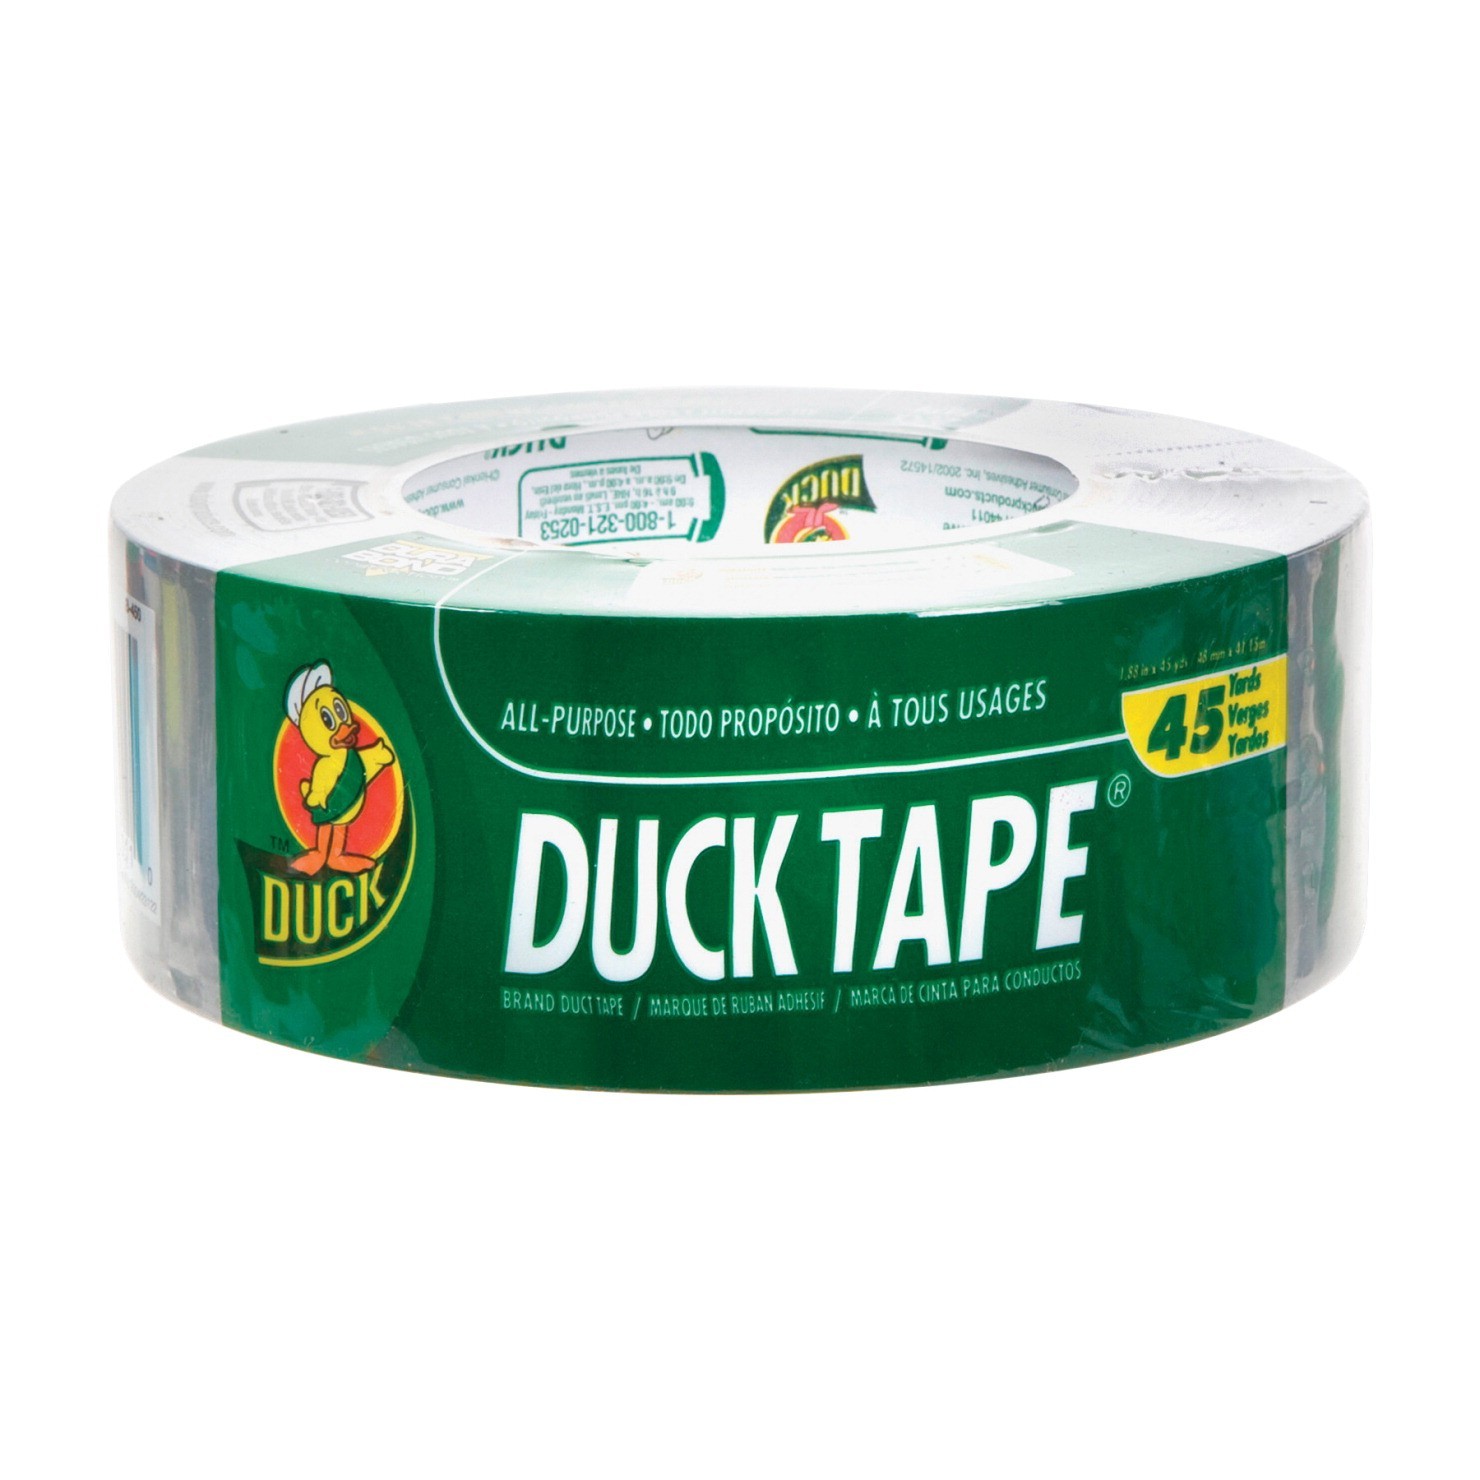 1-7/8" X 45 yds Duck Brand Original Extra Sticky Rubber Premium Waterproof Self-Adhesive Duct Tape, Silver, Cloth Backing